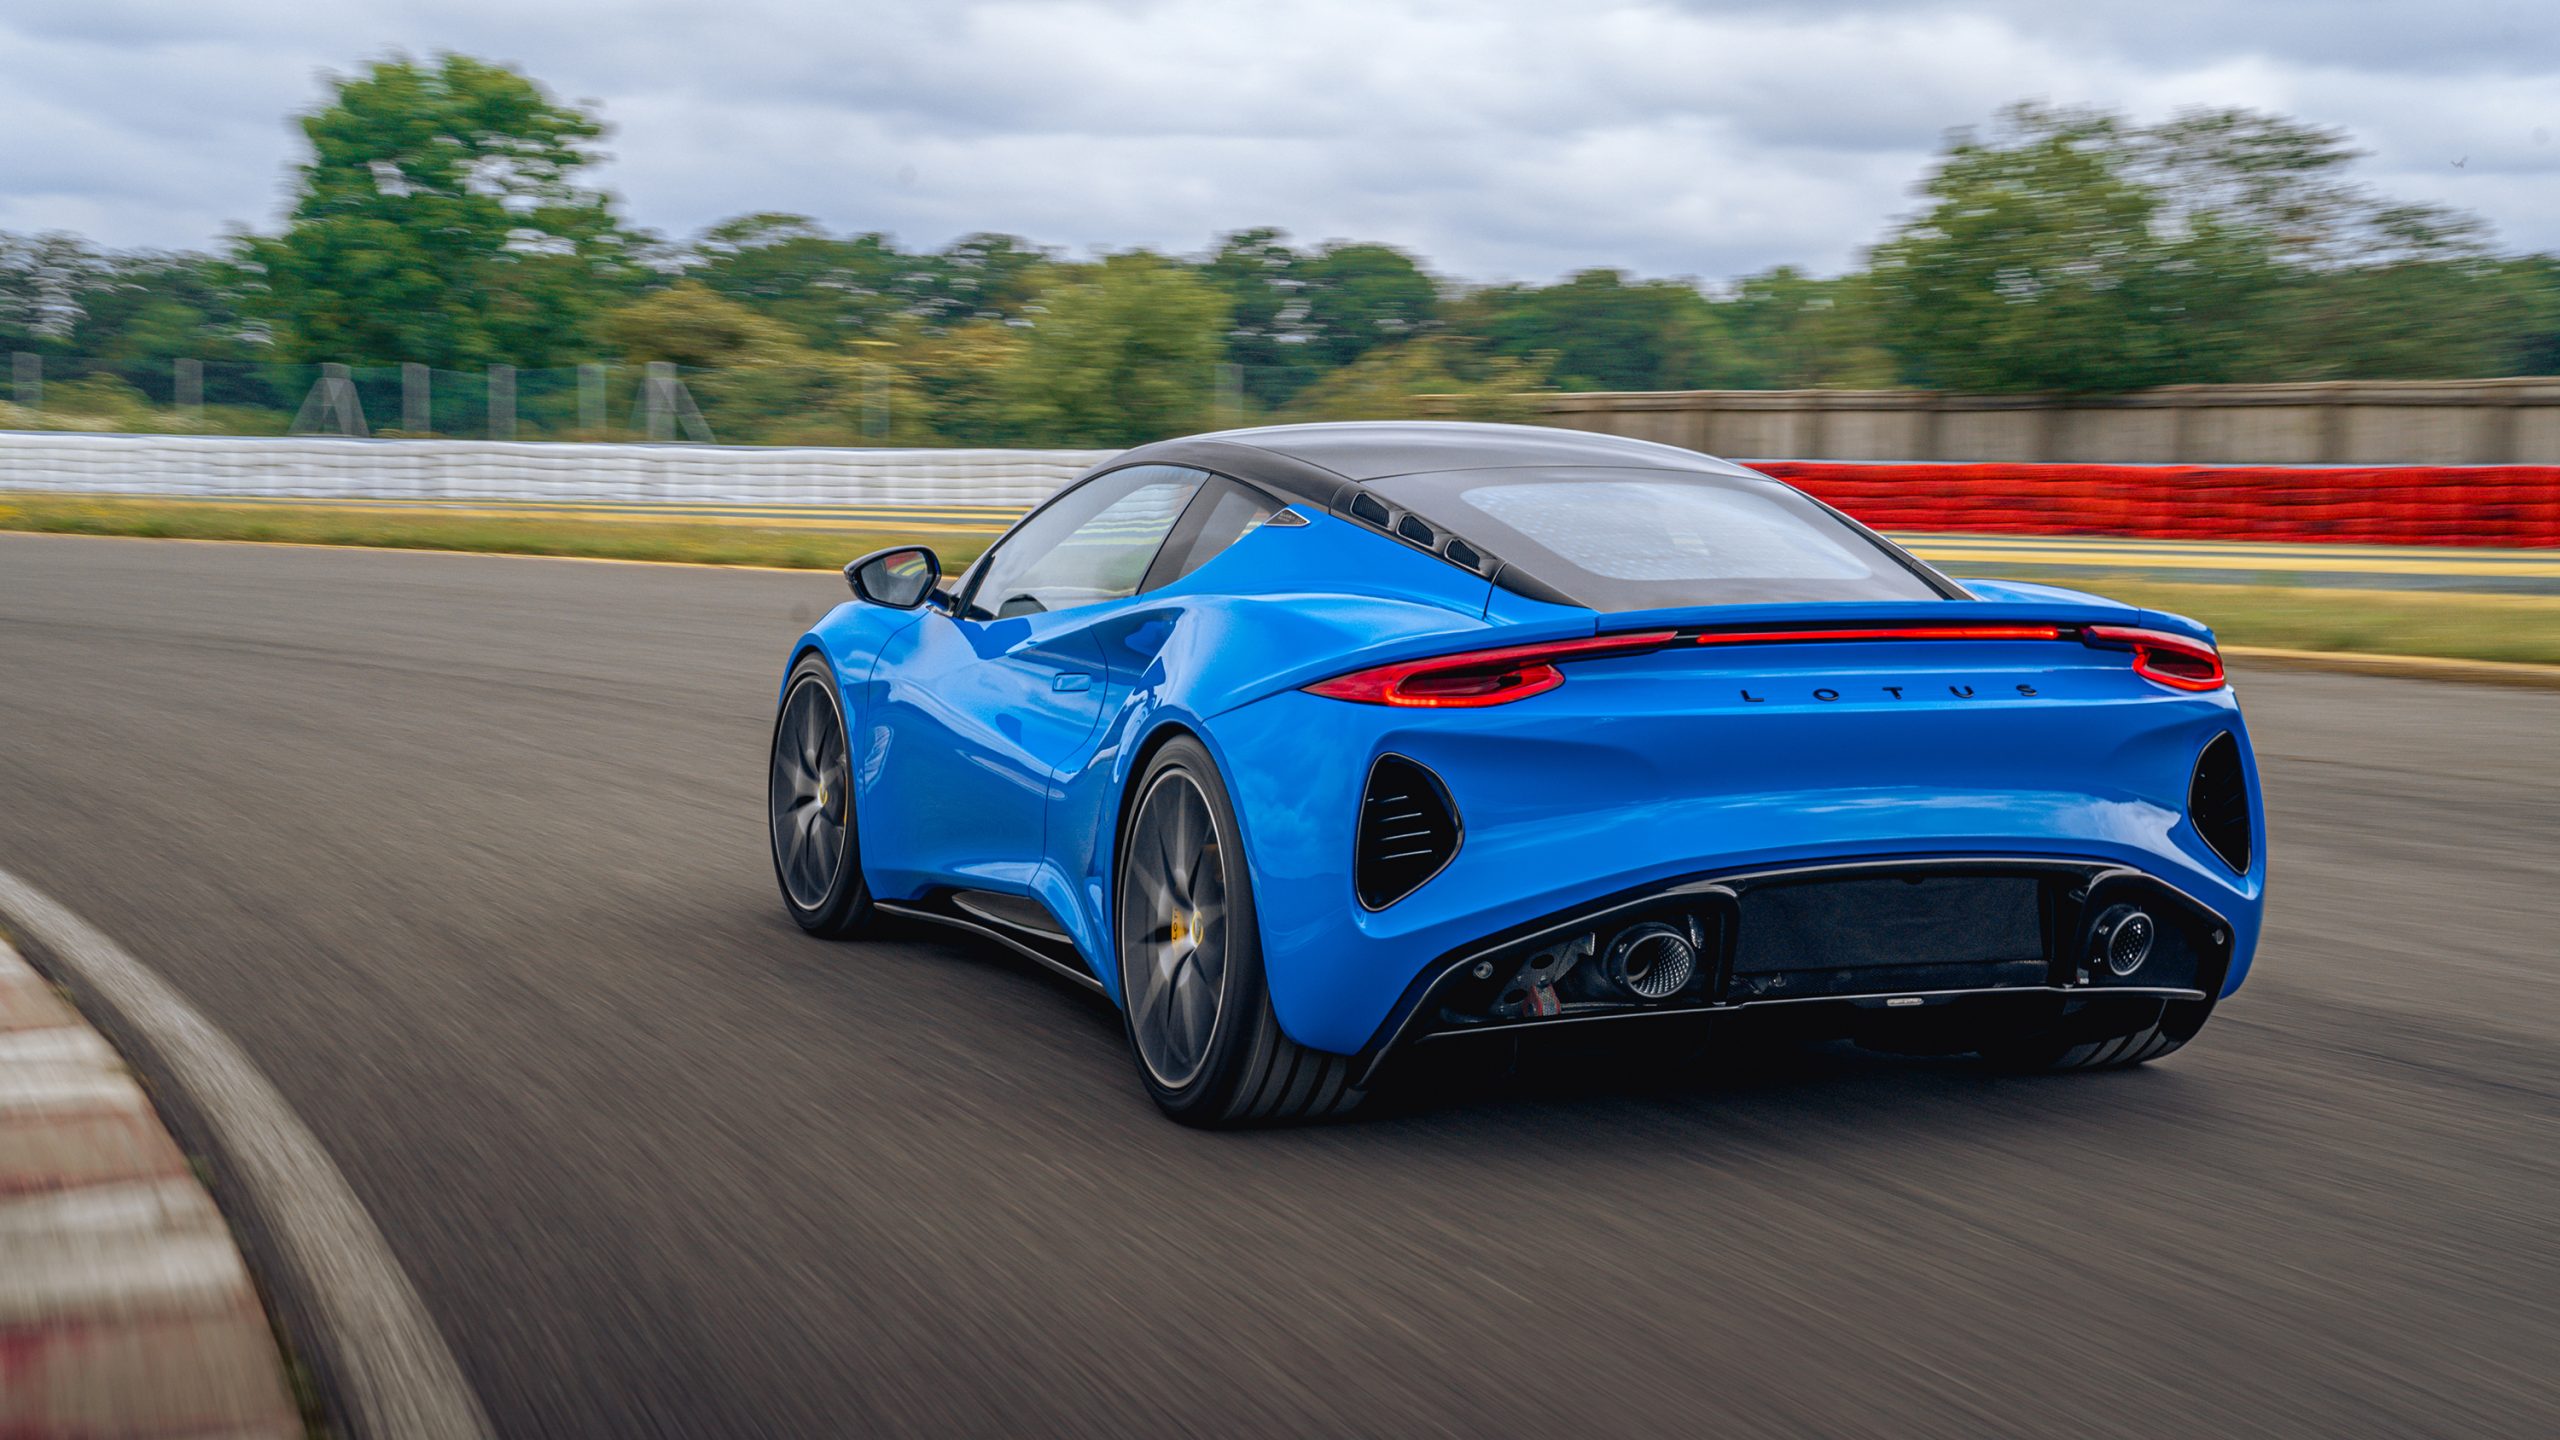 American Buyers Now Able to Receive Delivery of Lotus Emira Sports Cars